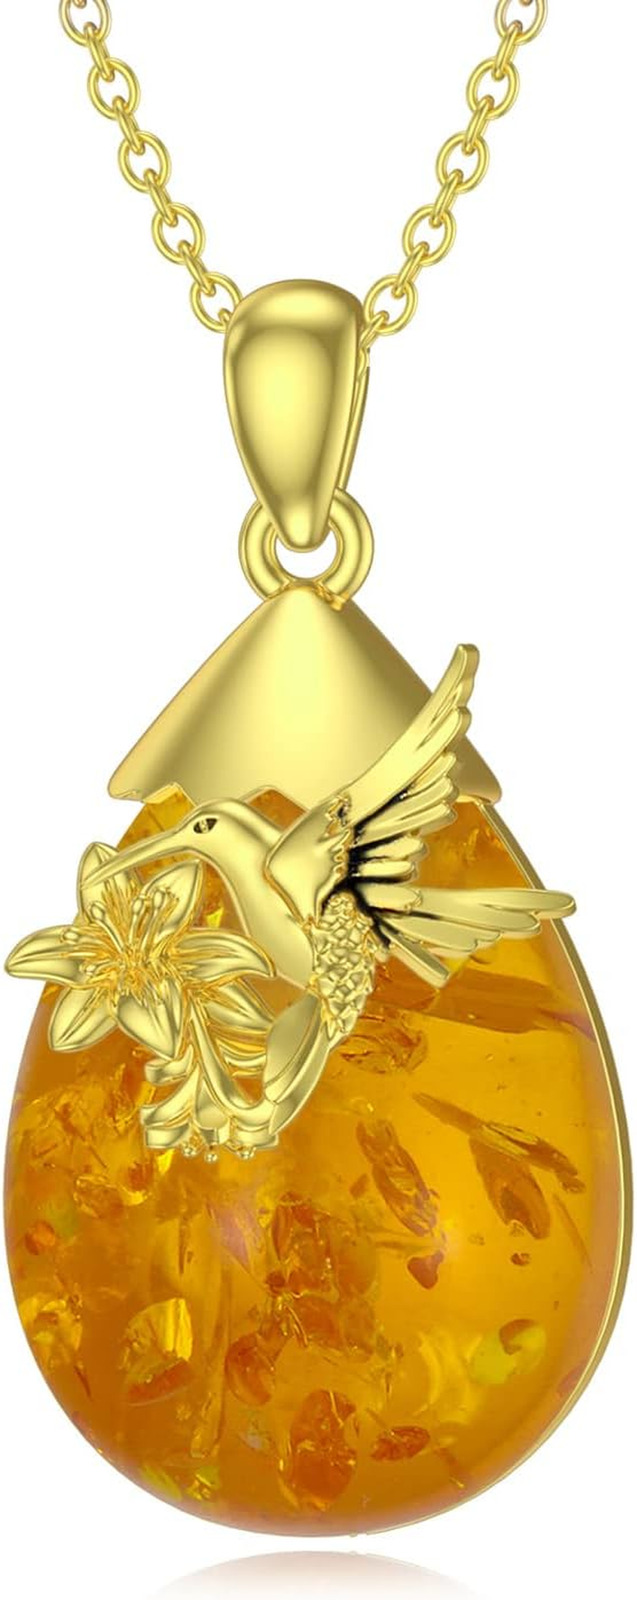 Hummingbird Amber Pendant Necklace 14K Gold Plated Sterling Silver Gifts Women